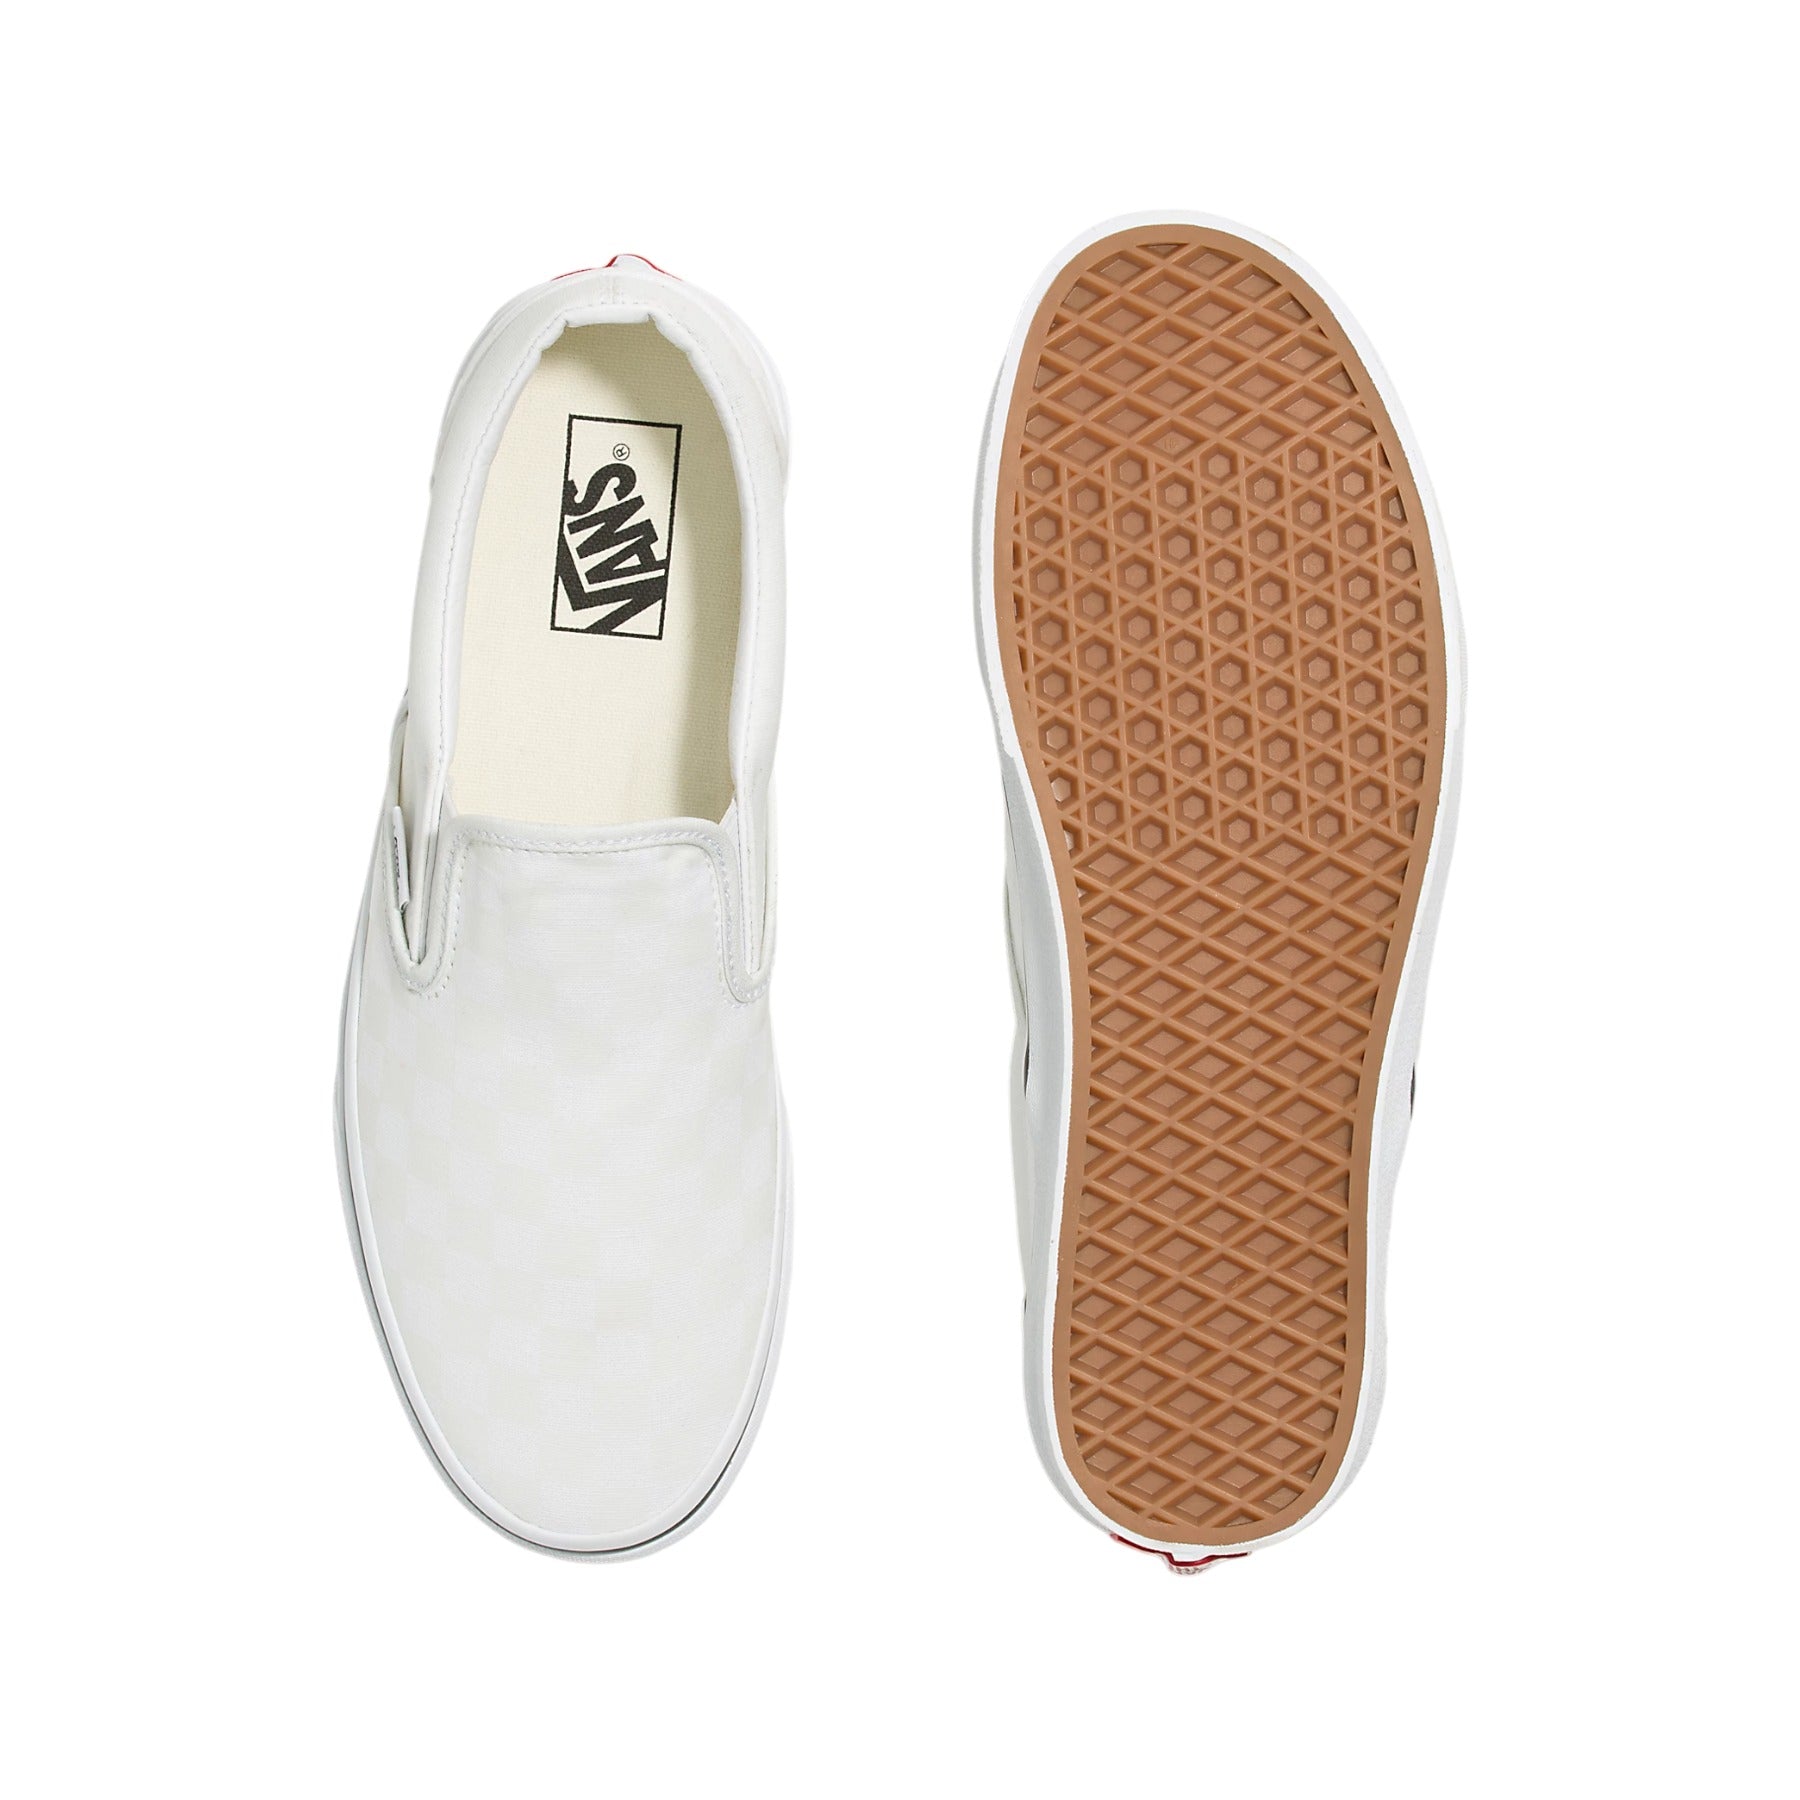 Vans Classic Slip-On Shoes - Glow Checkerboard